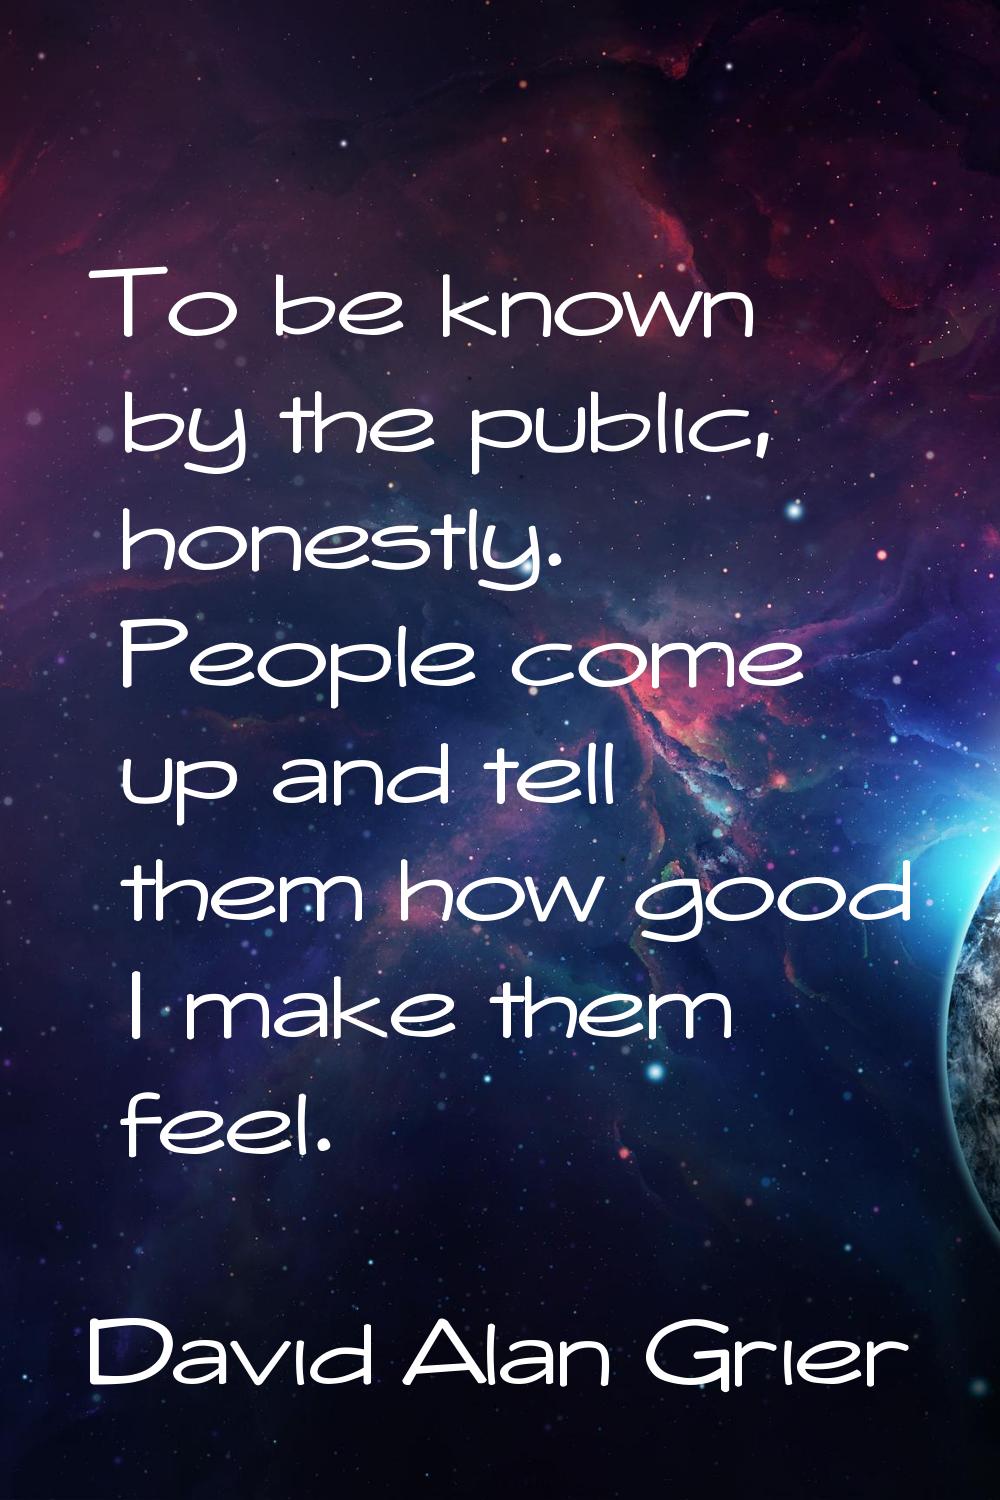 To be known by the public, honestly. People come up and tell them how good I make them feel.